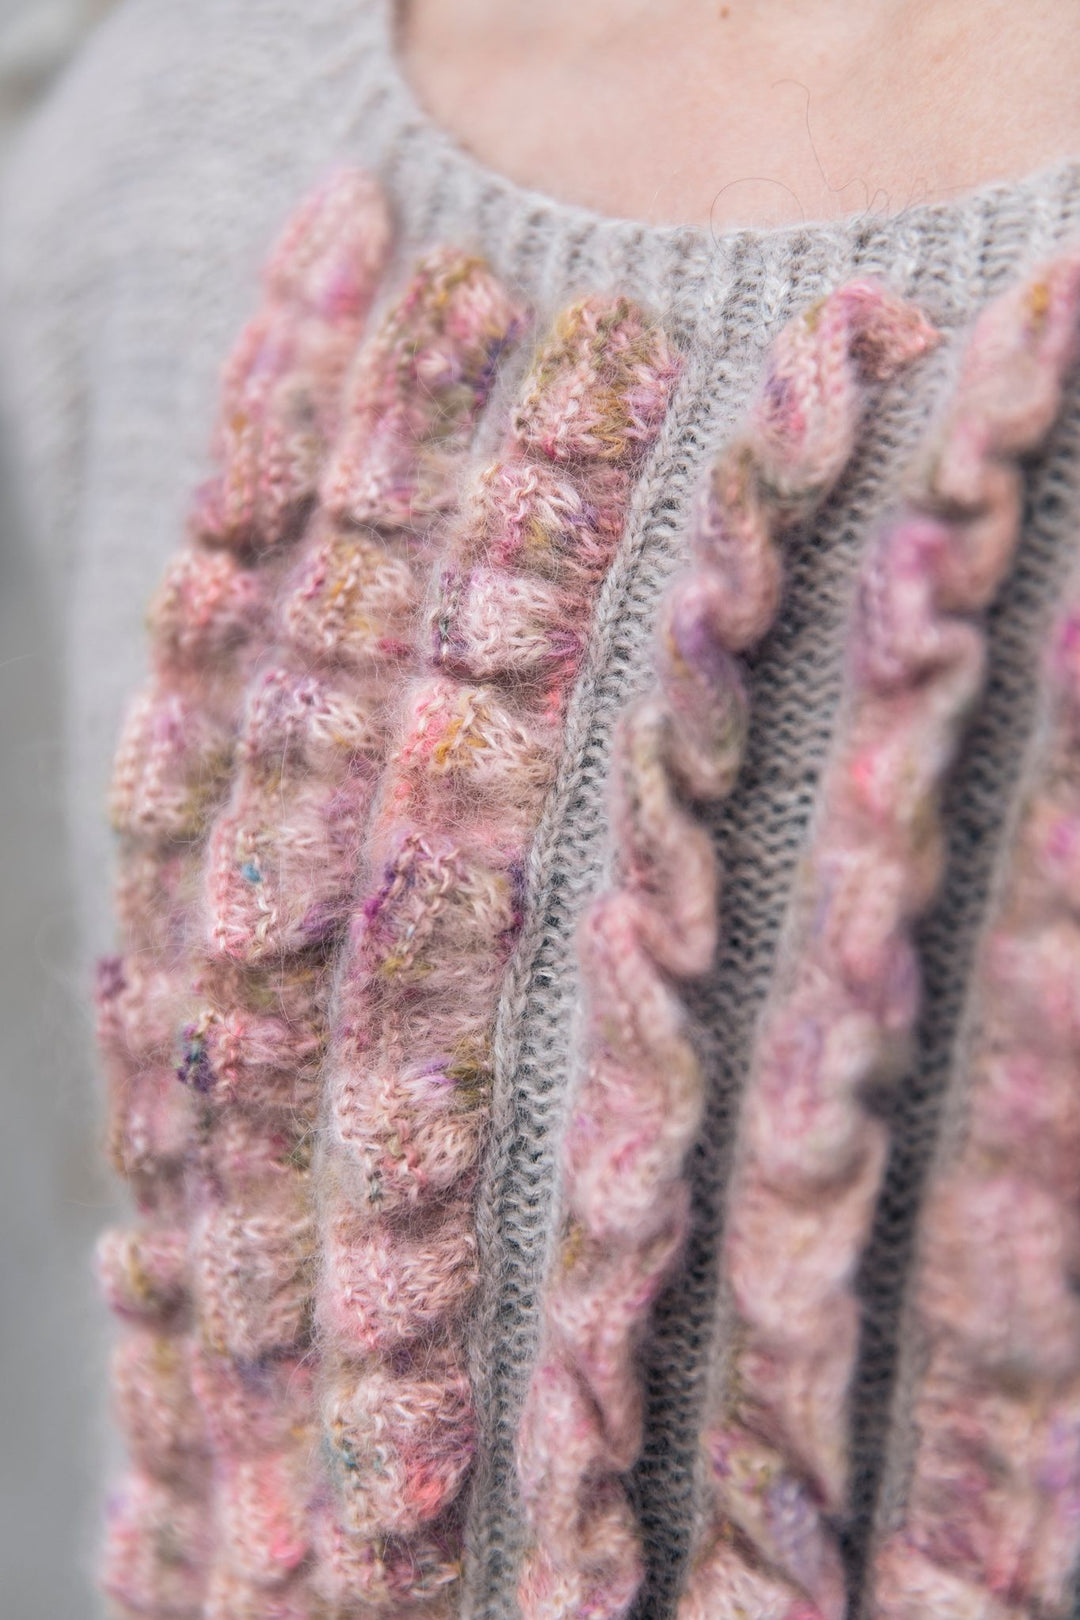 NEONS & NEUTRALS - A Knitwear Collection Curated by Aimée Gille (Laine Publishing)